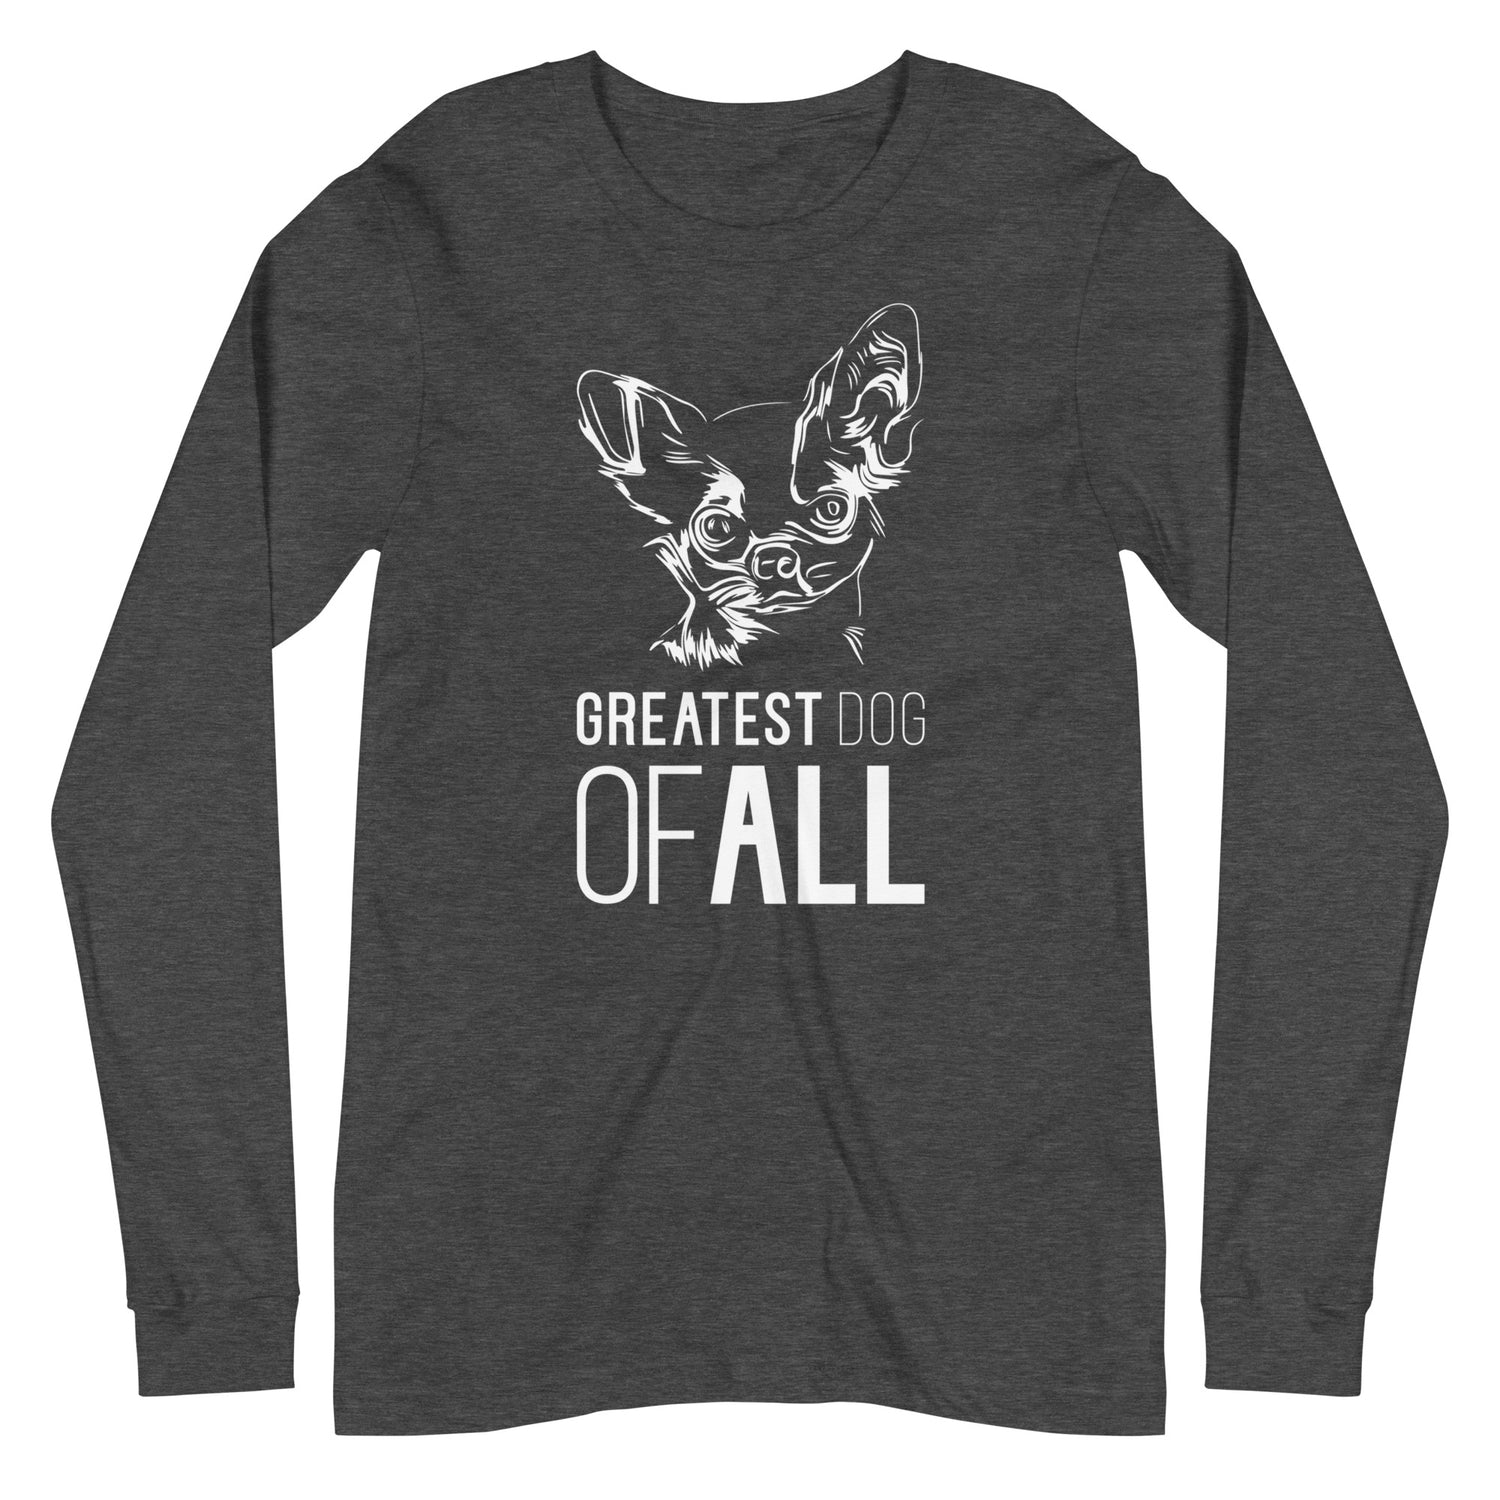 White line Chihuahua face with Greatest Dog of All caption on unisex dark grey heather long sleeve t-shirt